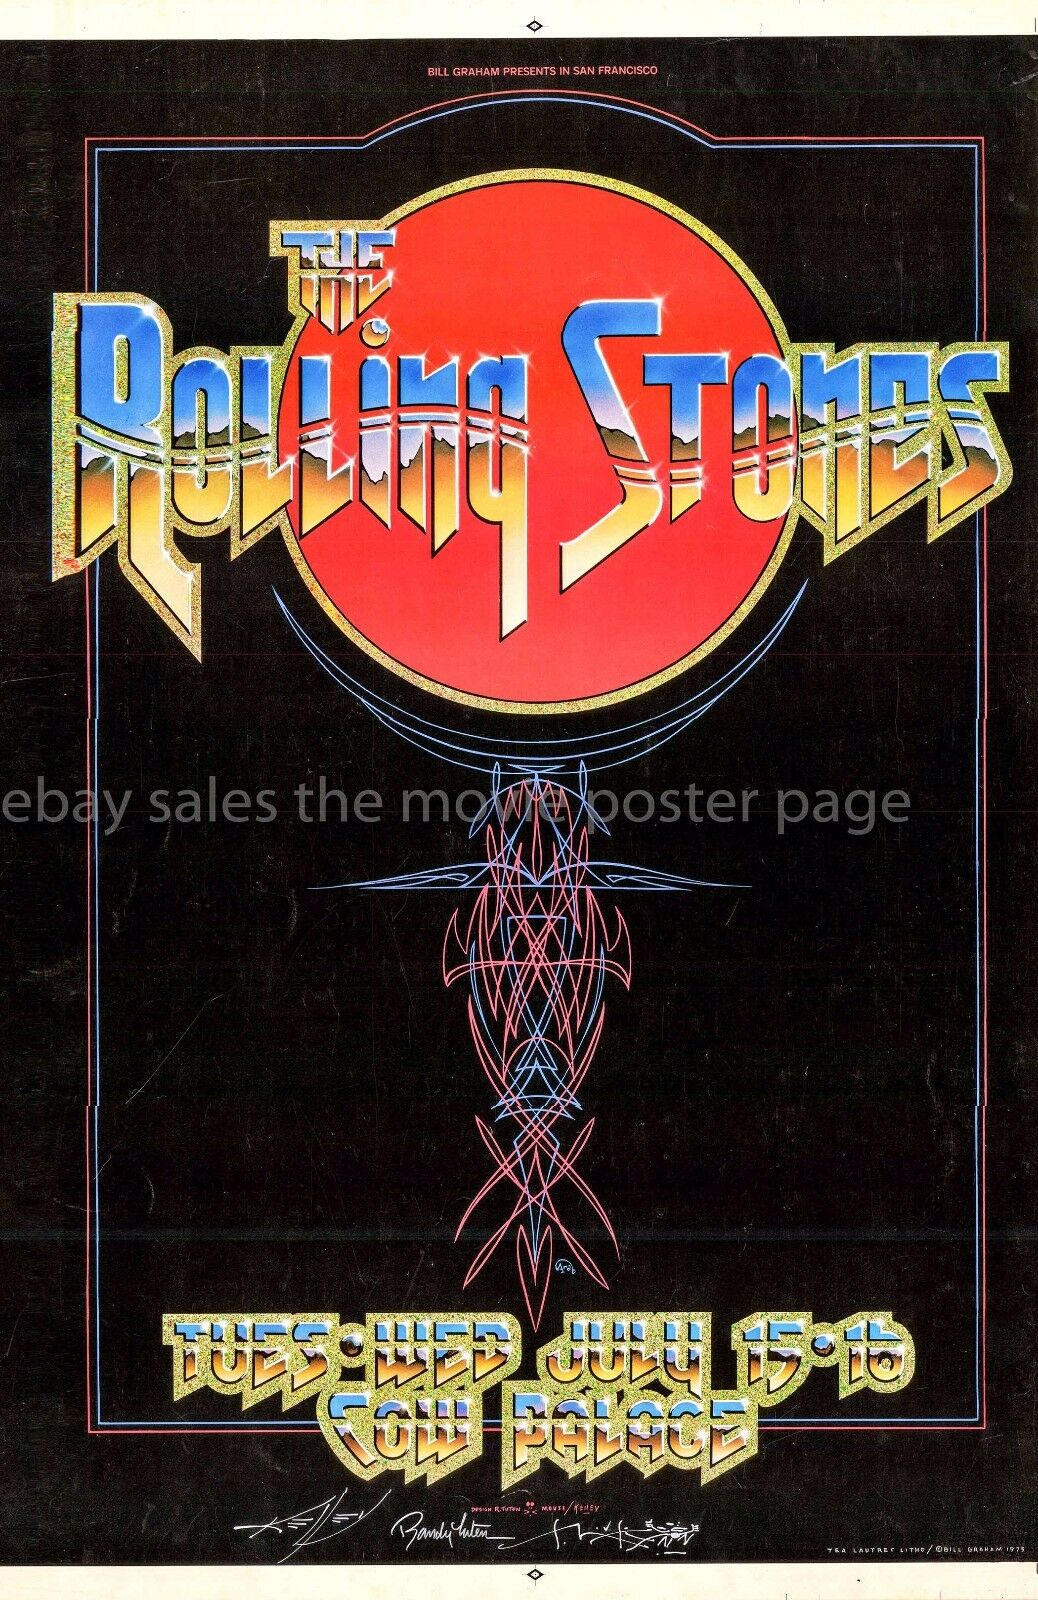 Rolling Stones 1975 Cow Palace Concert Poster